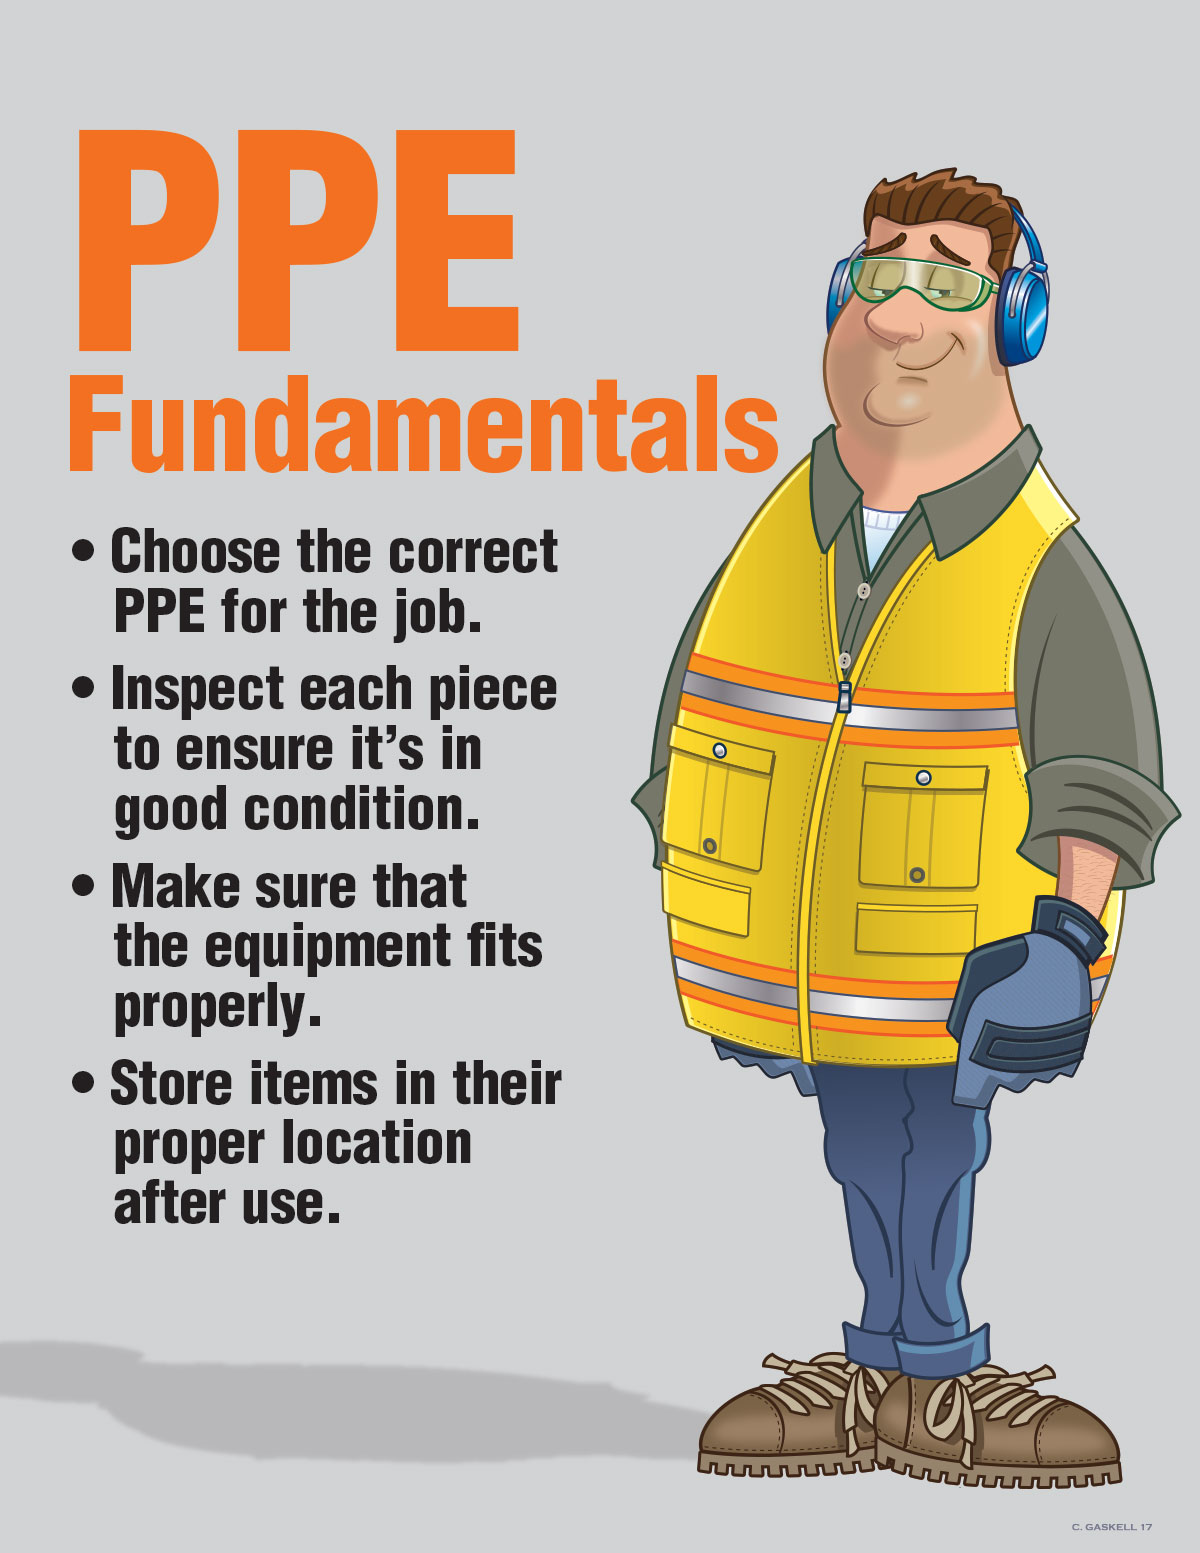 PPE, Safety Gear, Personal Protective Equipment